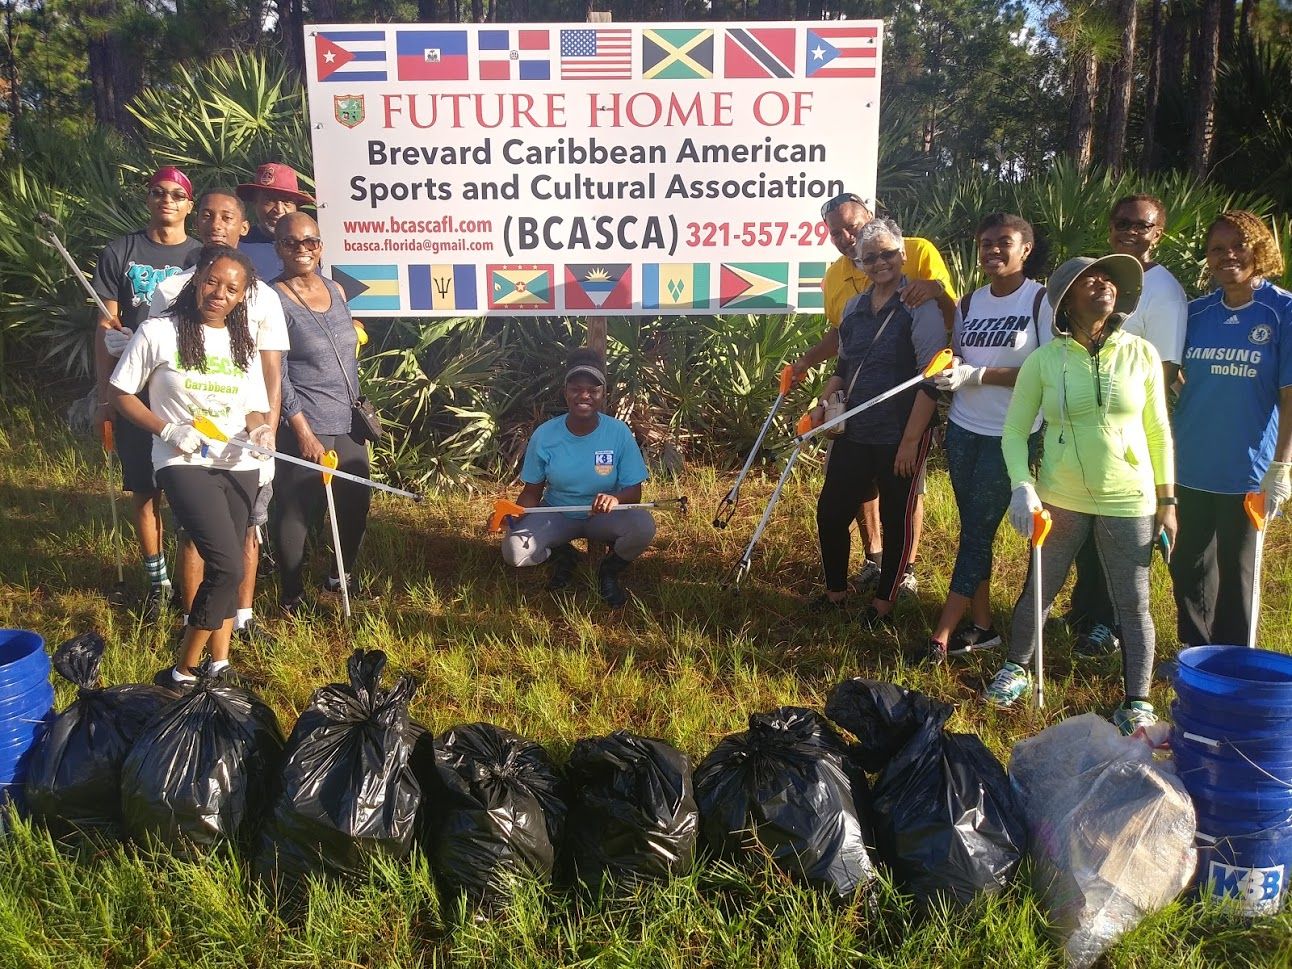 Brevard Caribbean American Sports and Cultural Association - Emerson Rd NW Palm Bay - Adopt A Road